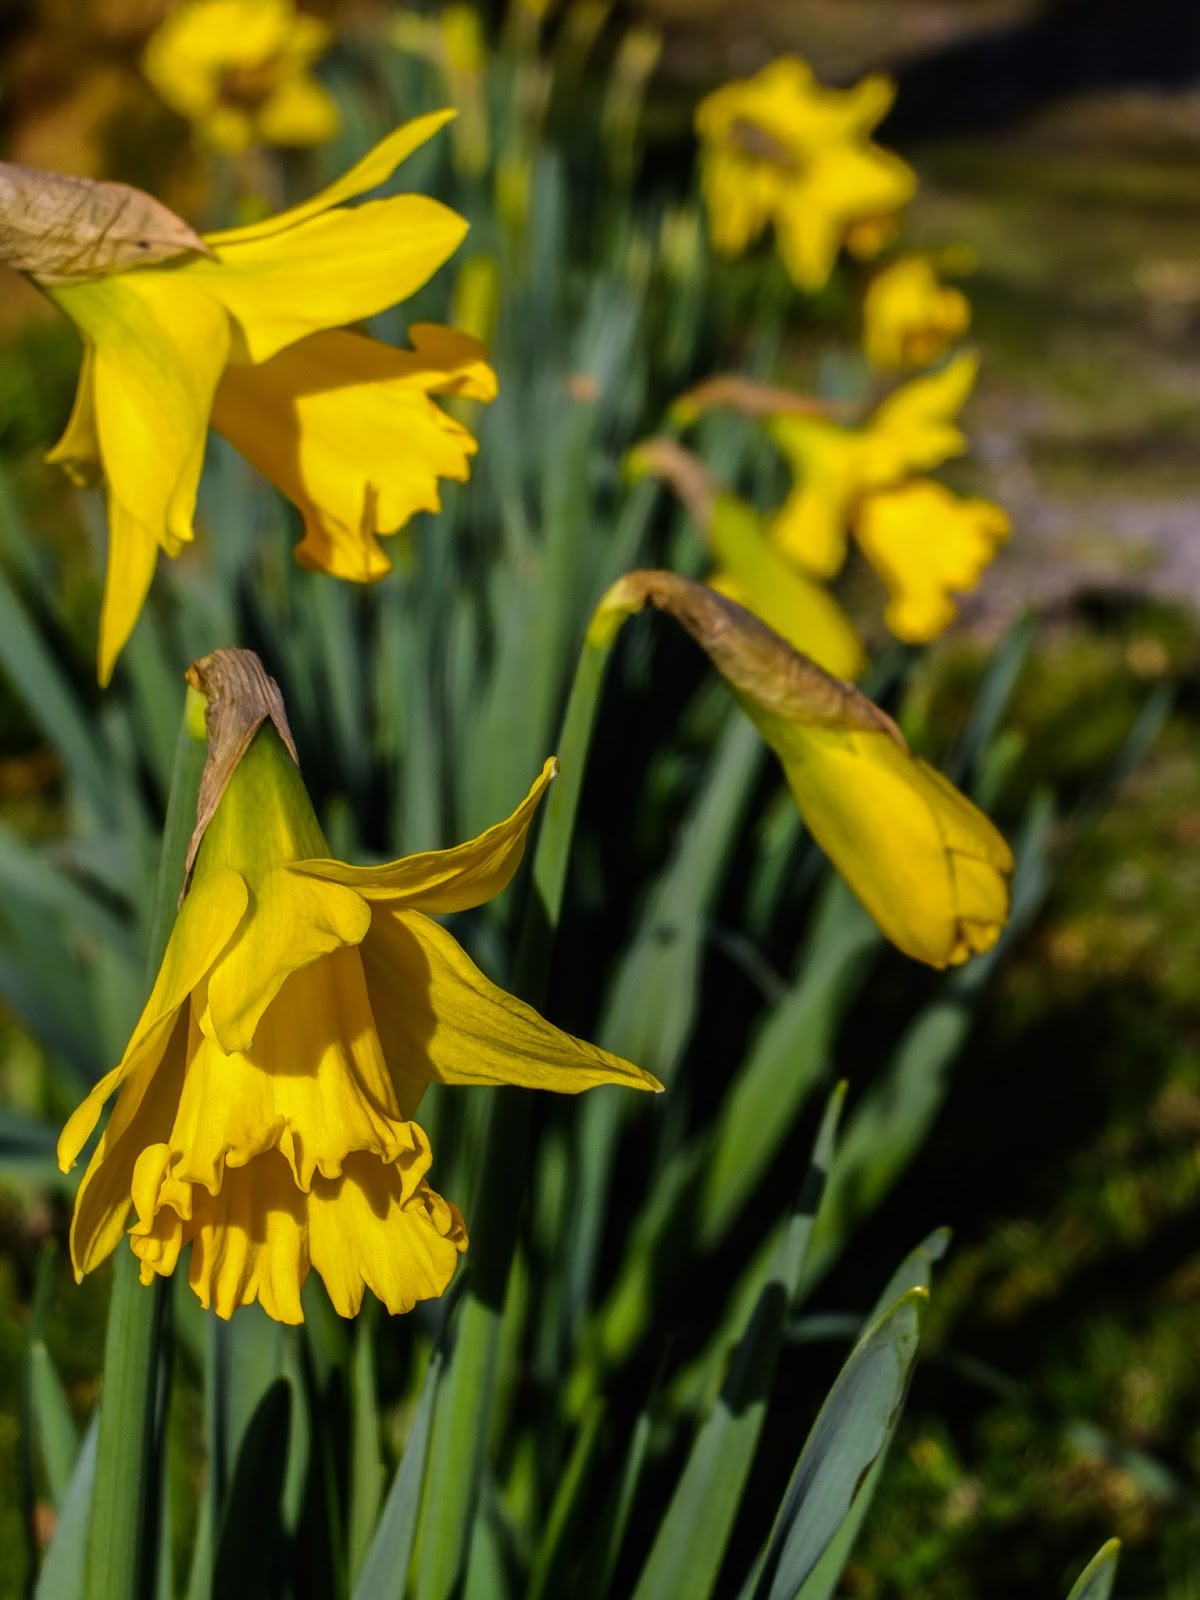 Close up of a daffodil head and a line of daffodils behind.